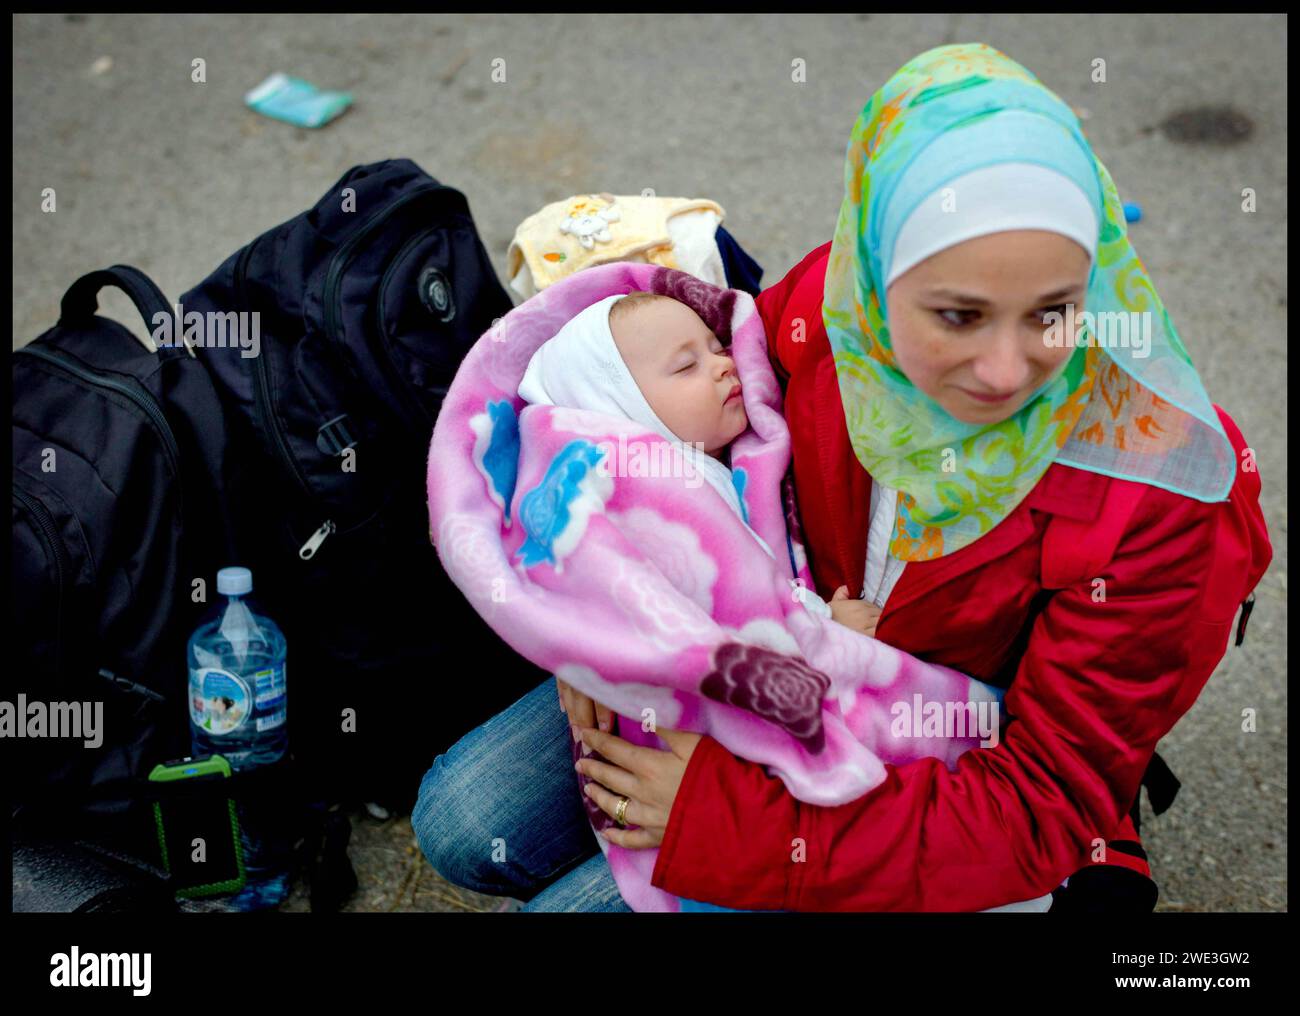 Image ©Licensed to Parsons Media. 22/09/2015.Croatia. Migrants in Croatia. Migrant children.   Croatia. Migrant Haila wipes away a tear with her daughter Lilas 9 months, sitting on the road outside the gates of a  refugee camp in Opatovac, Croatia, after just crossing the Serbian Border  Picture by Andrew Parsons / Parsons Media Stock Photo